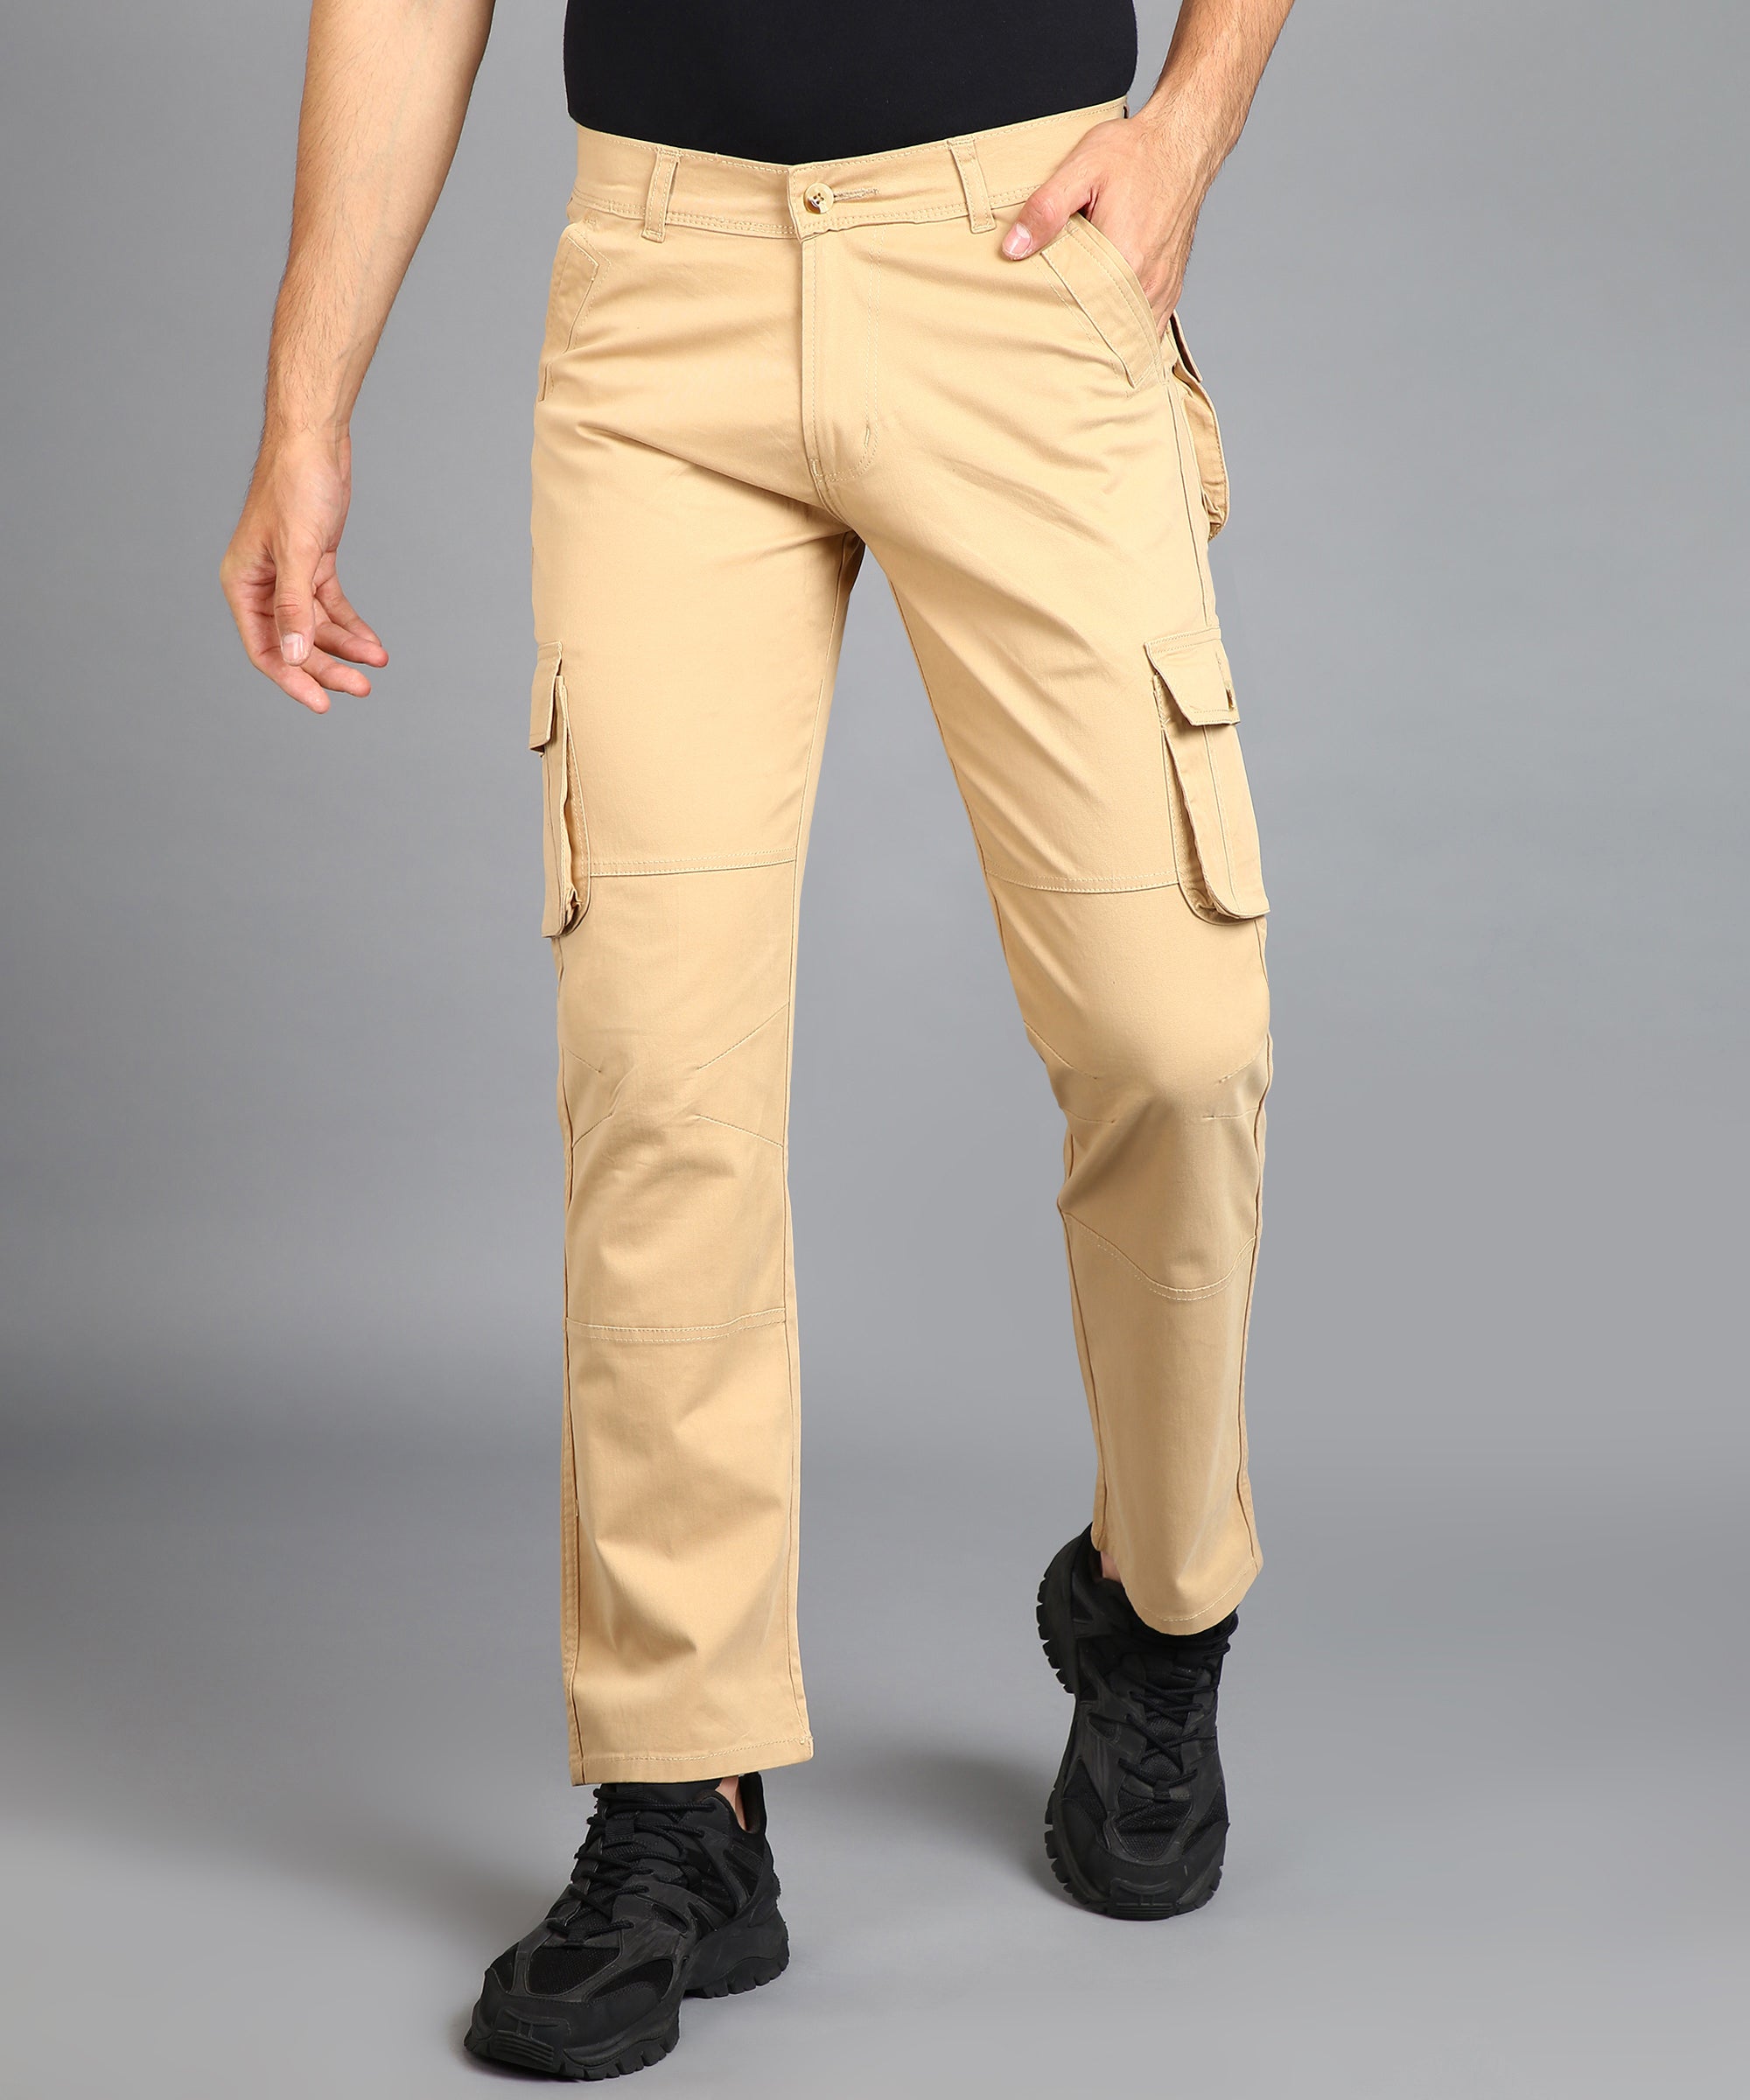 Men's Beige Regular Fit Solid Cargo Chino Pant with 6 Pockets